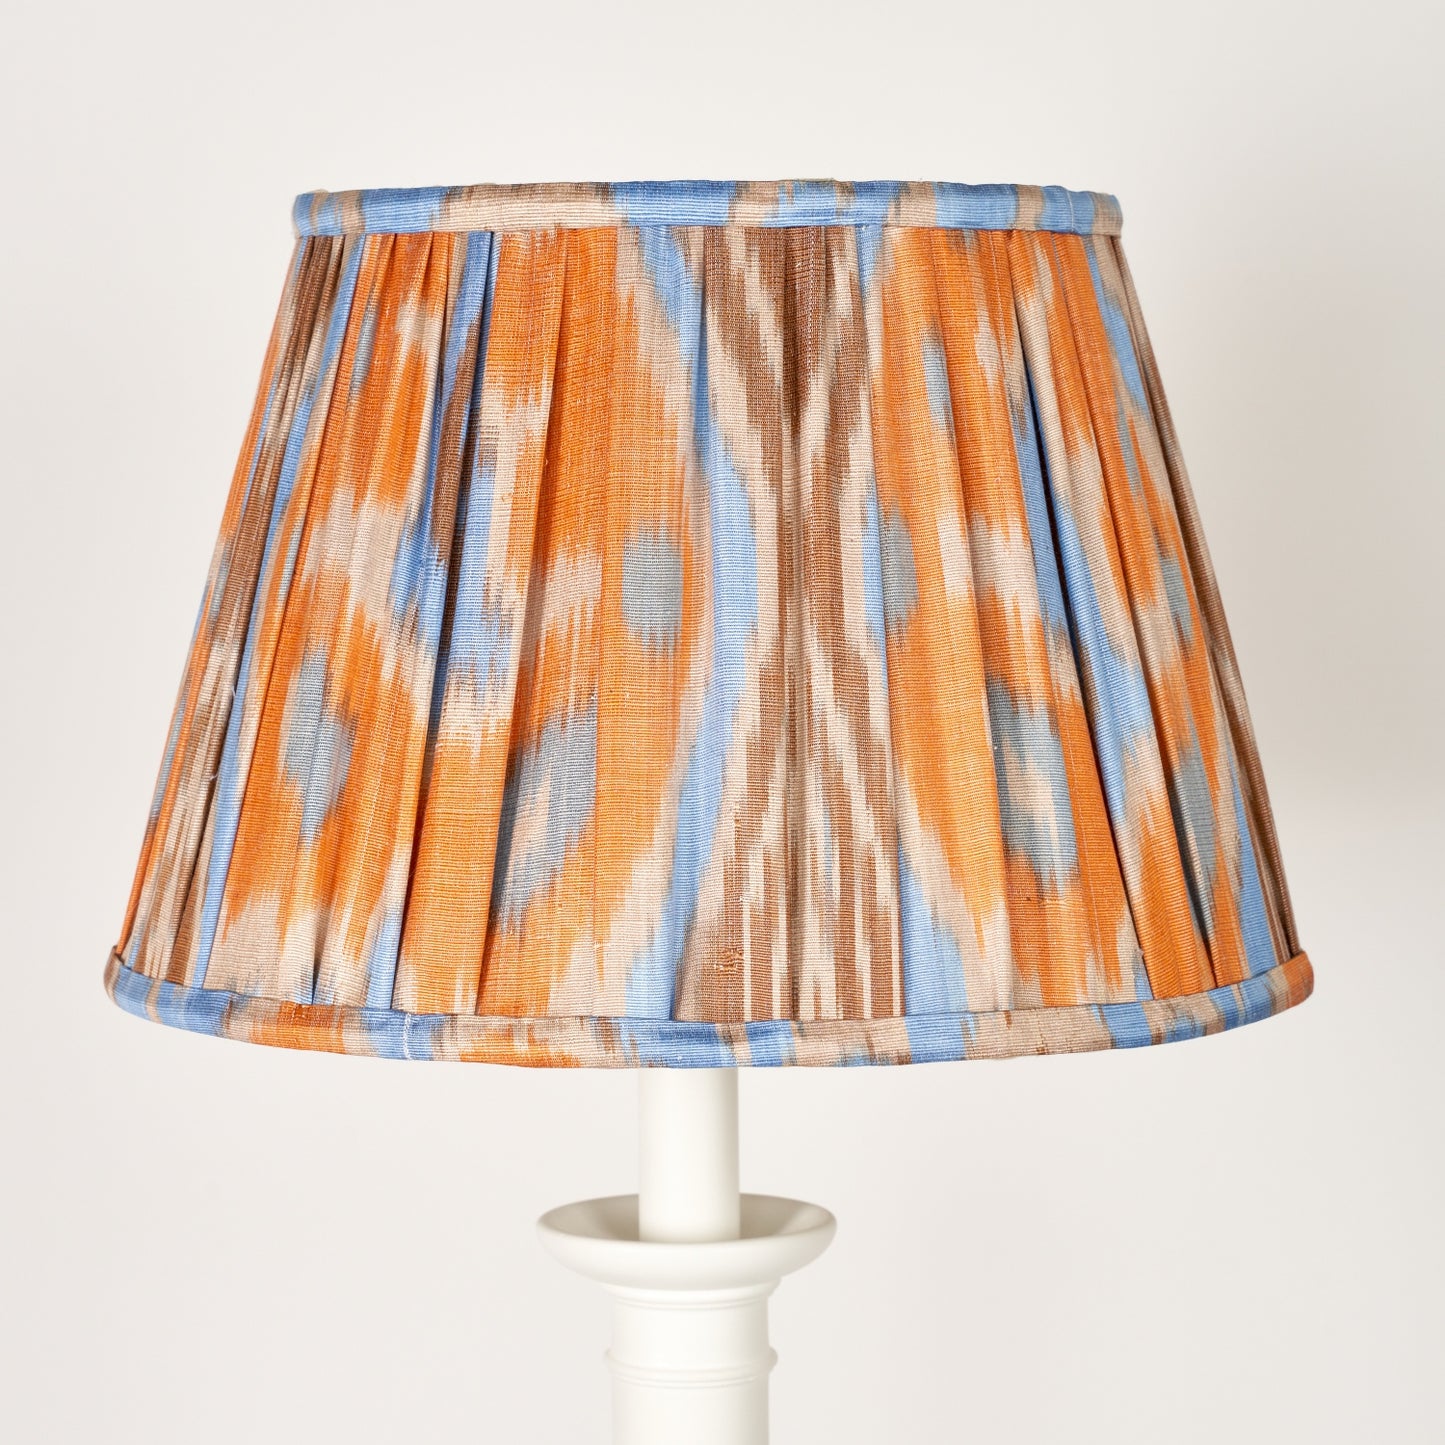 18" Butterfly Ikat Lampshade